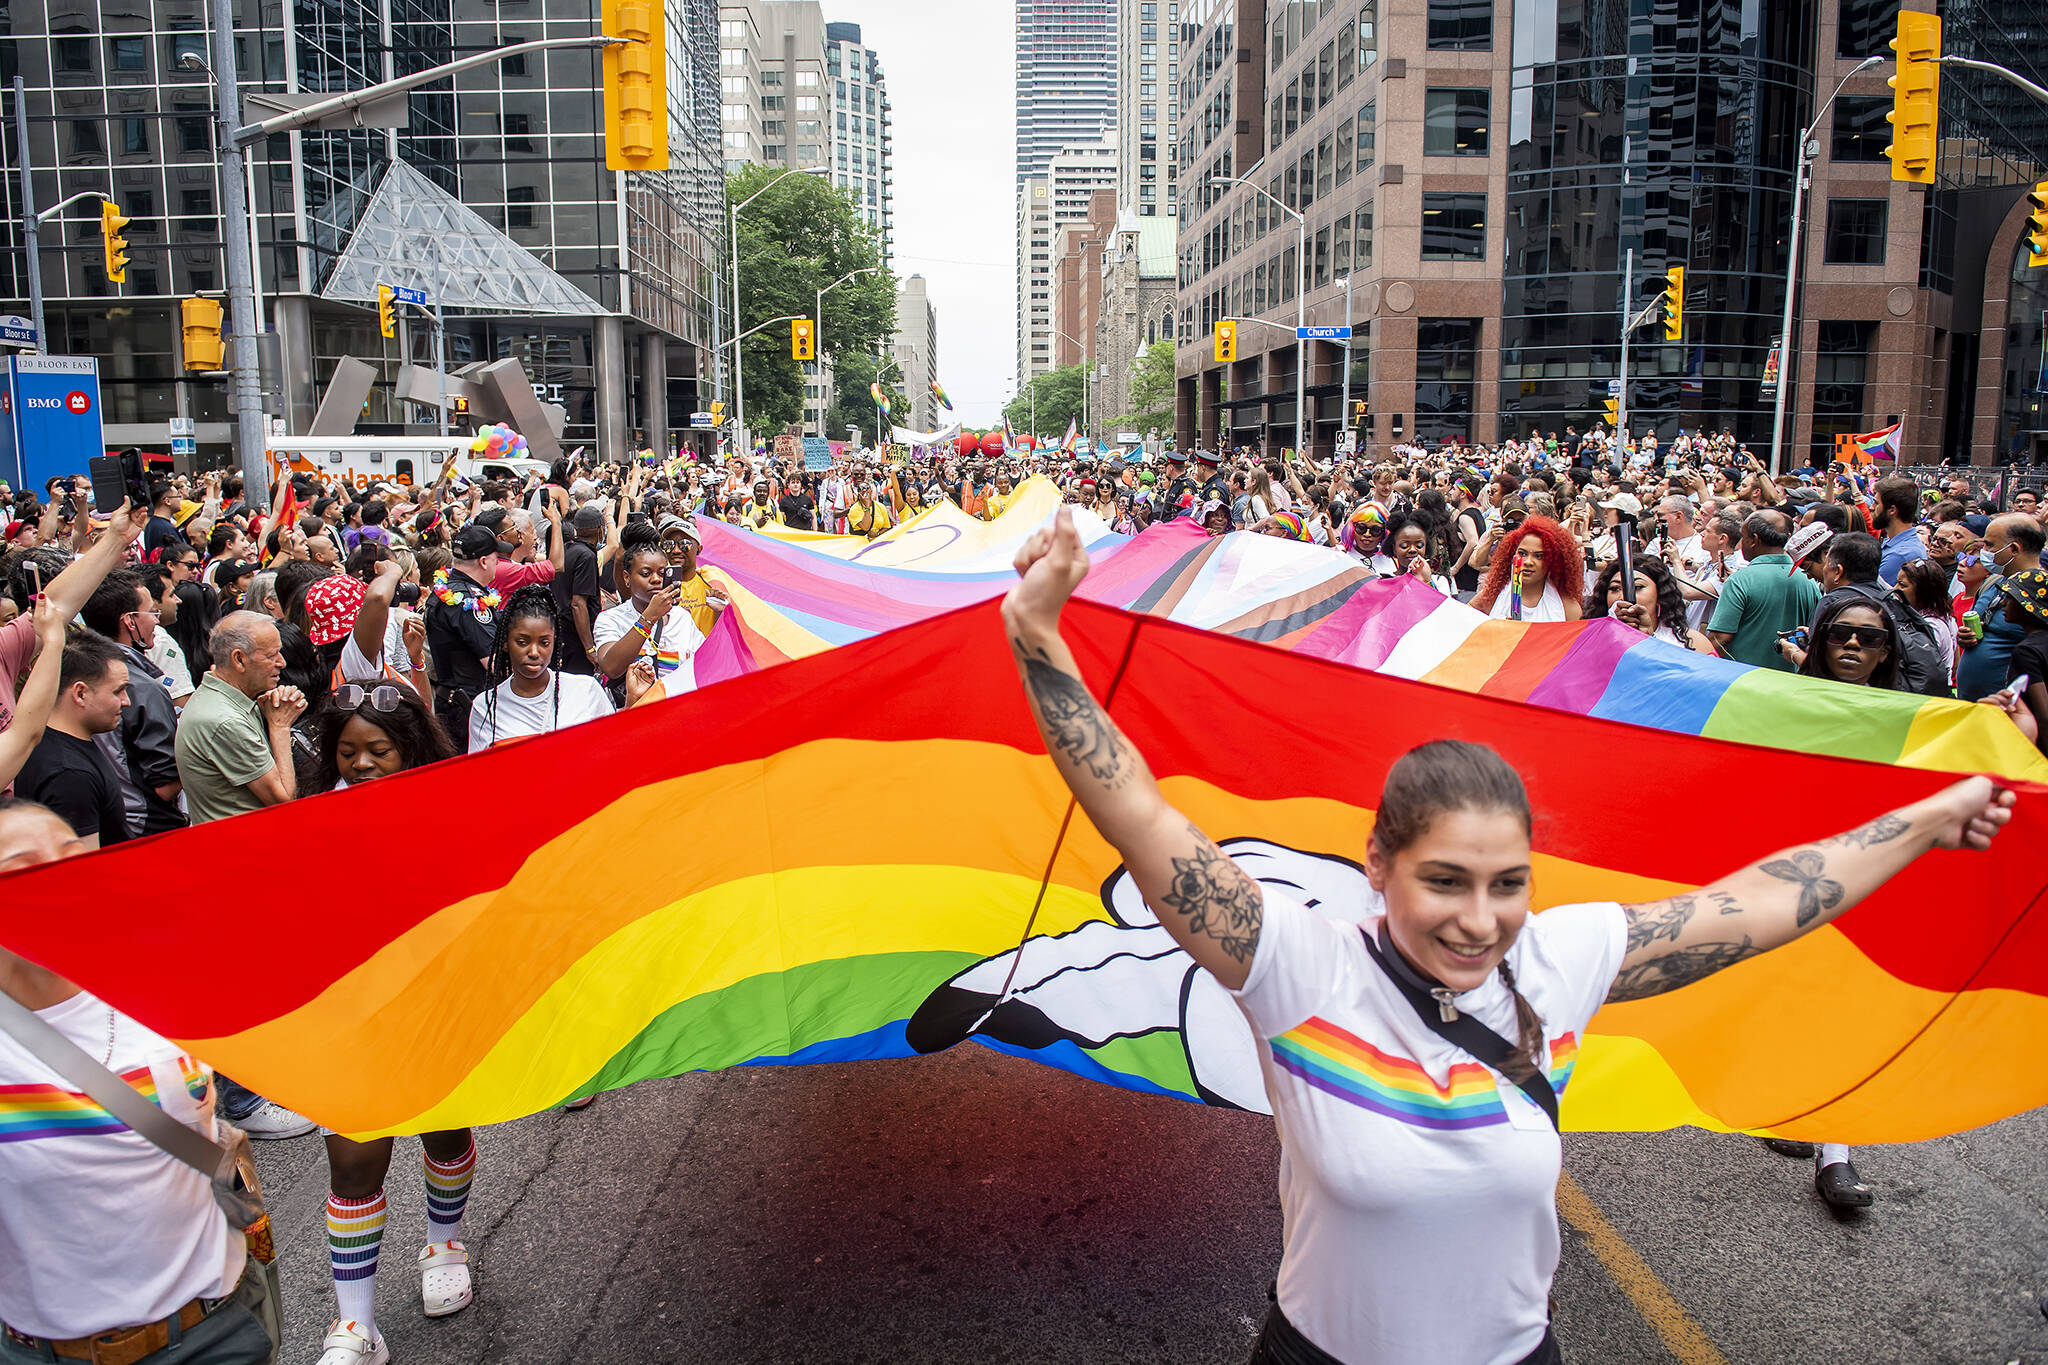 55 photos from the 2022 Pride Parade in Toronto